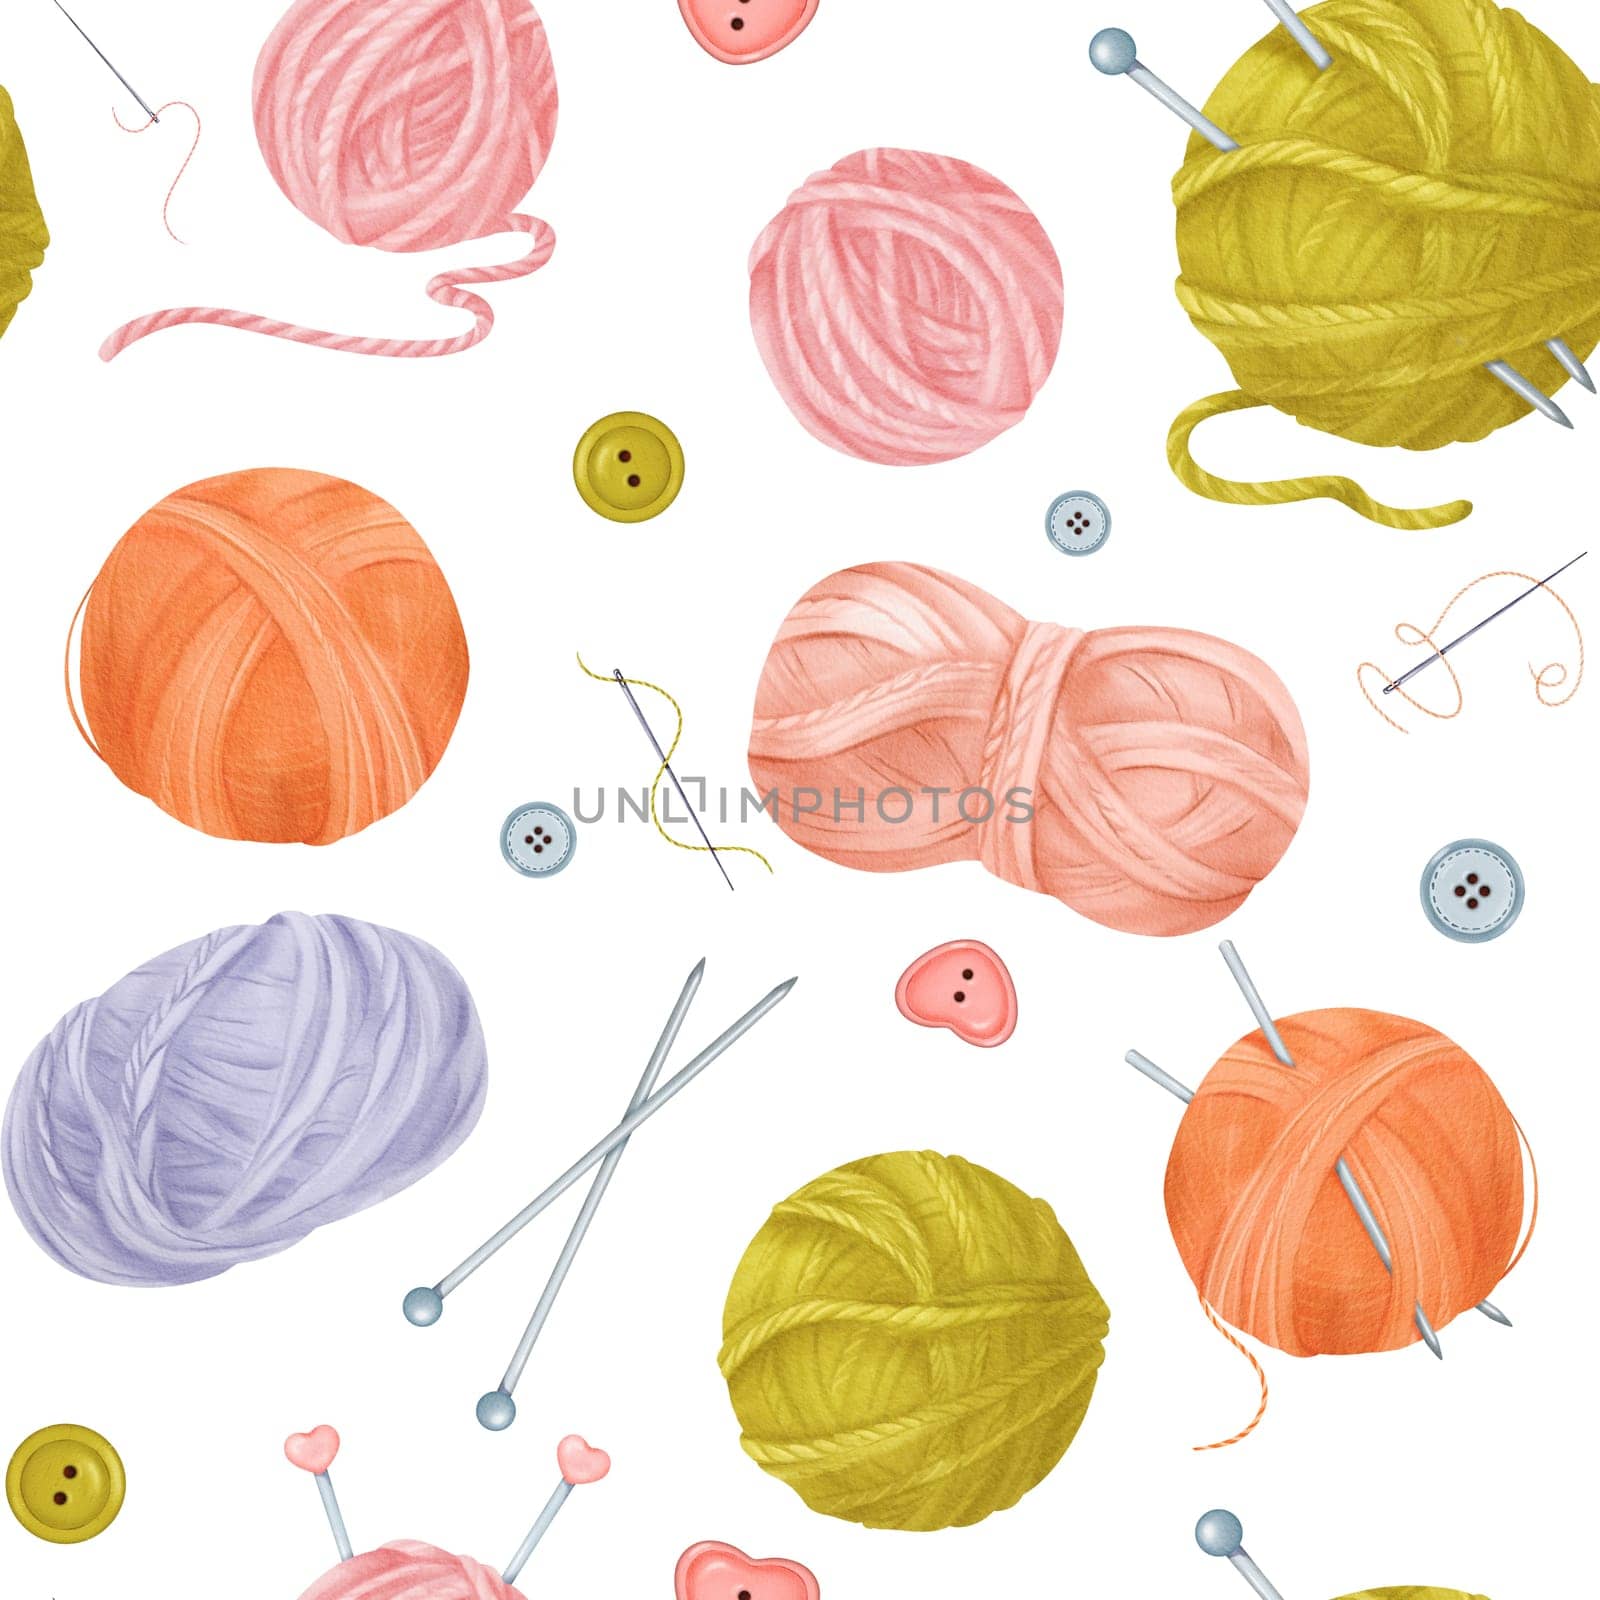 A seamless crafting-themed pattern featuring yarn skeins, colorful buttons, sewing needles with threads, and knitting needles. watercolor for textile design crafting projects by Art_Mari_Ka